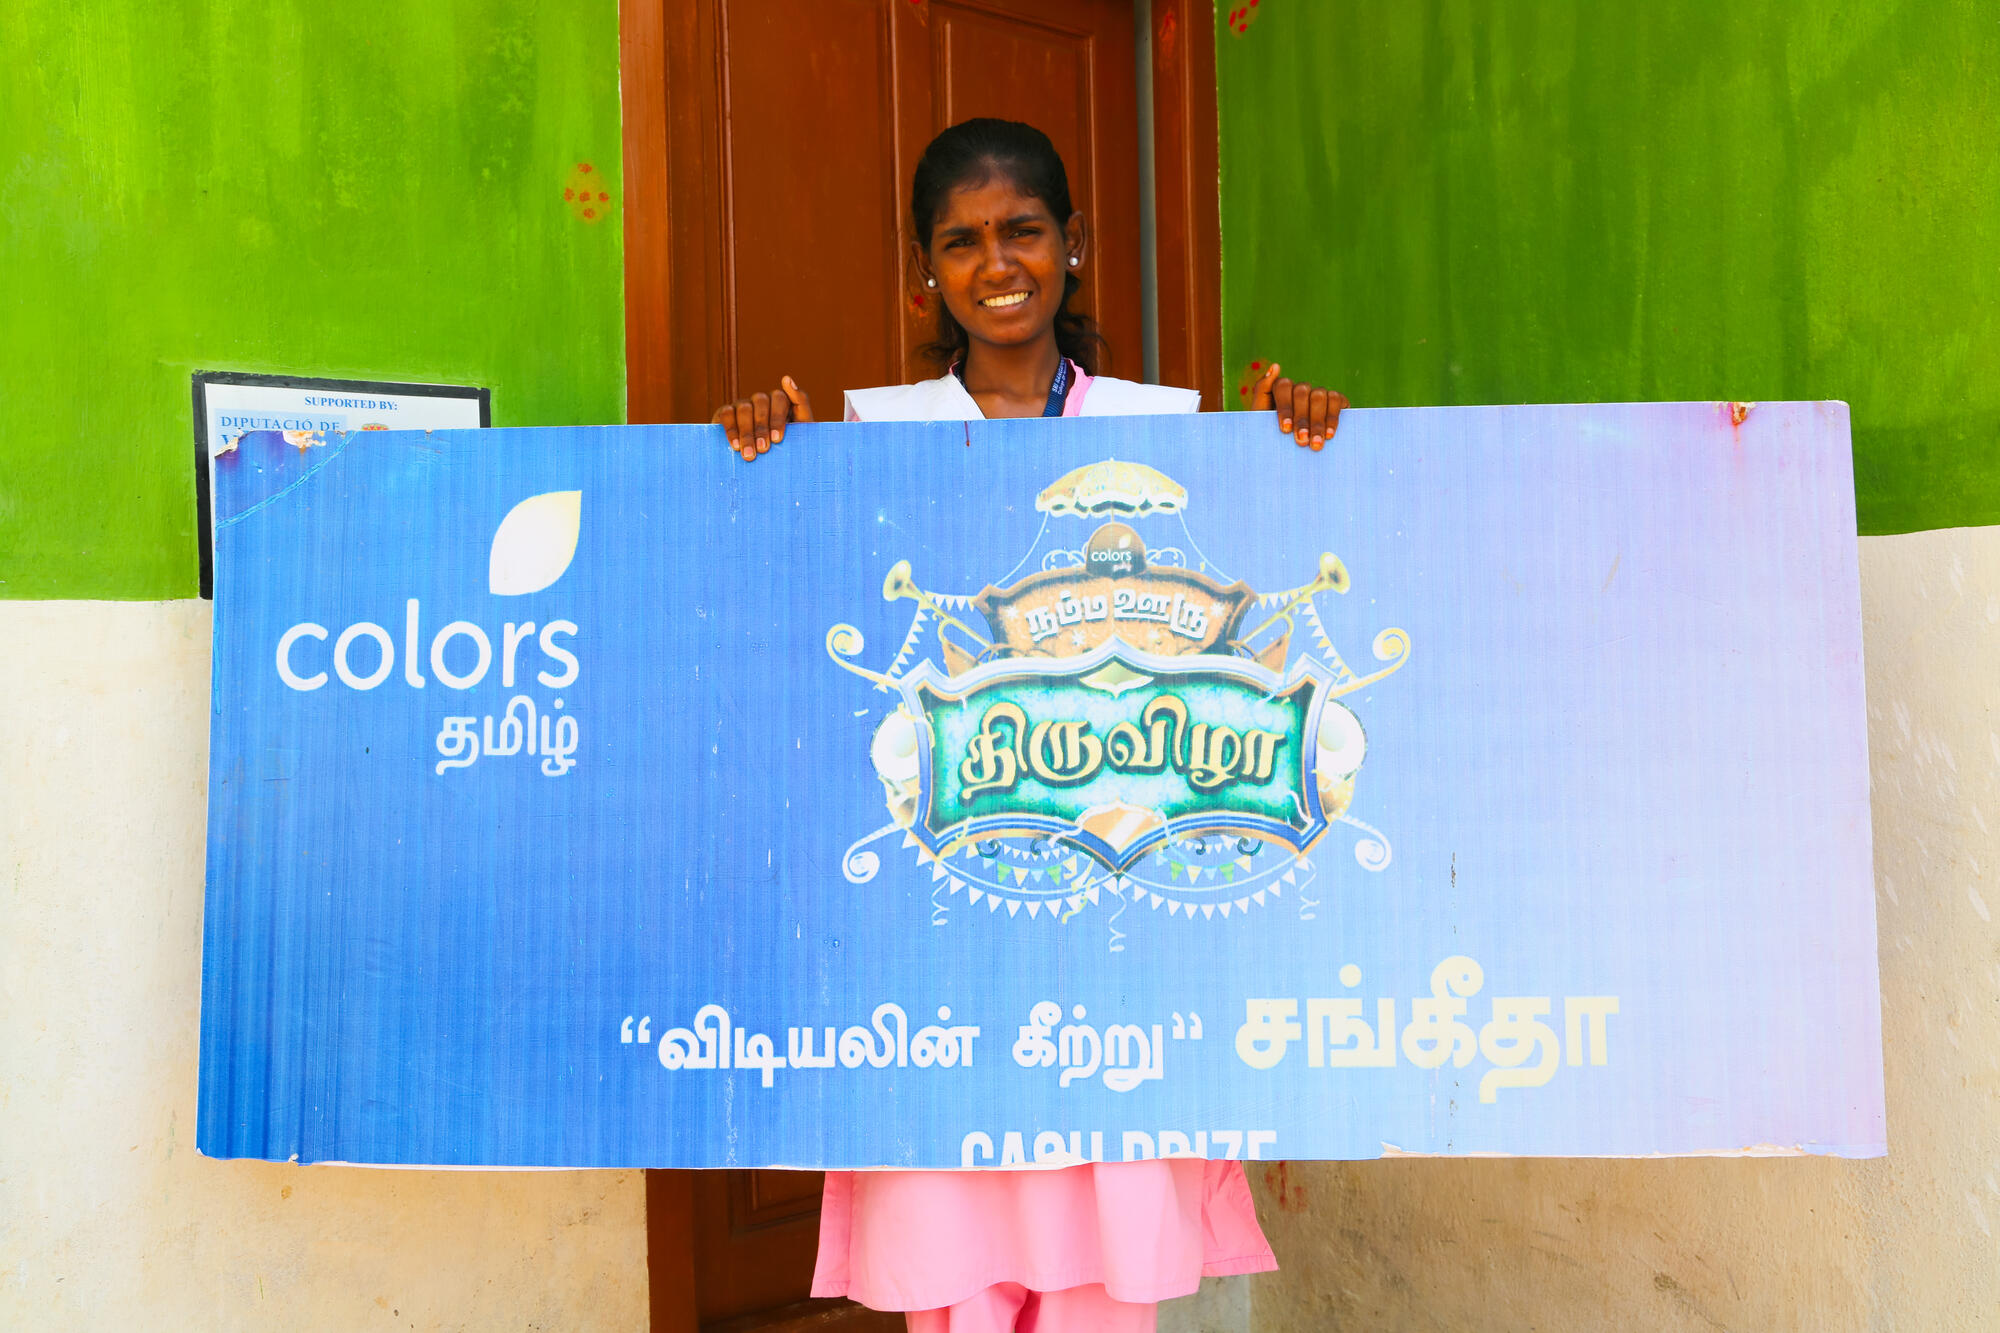 Sangeetha’s journey to be the first graduate of her Village